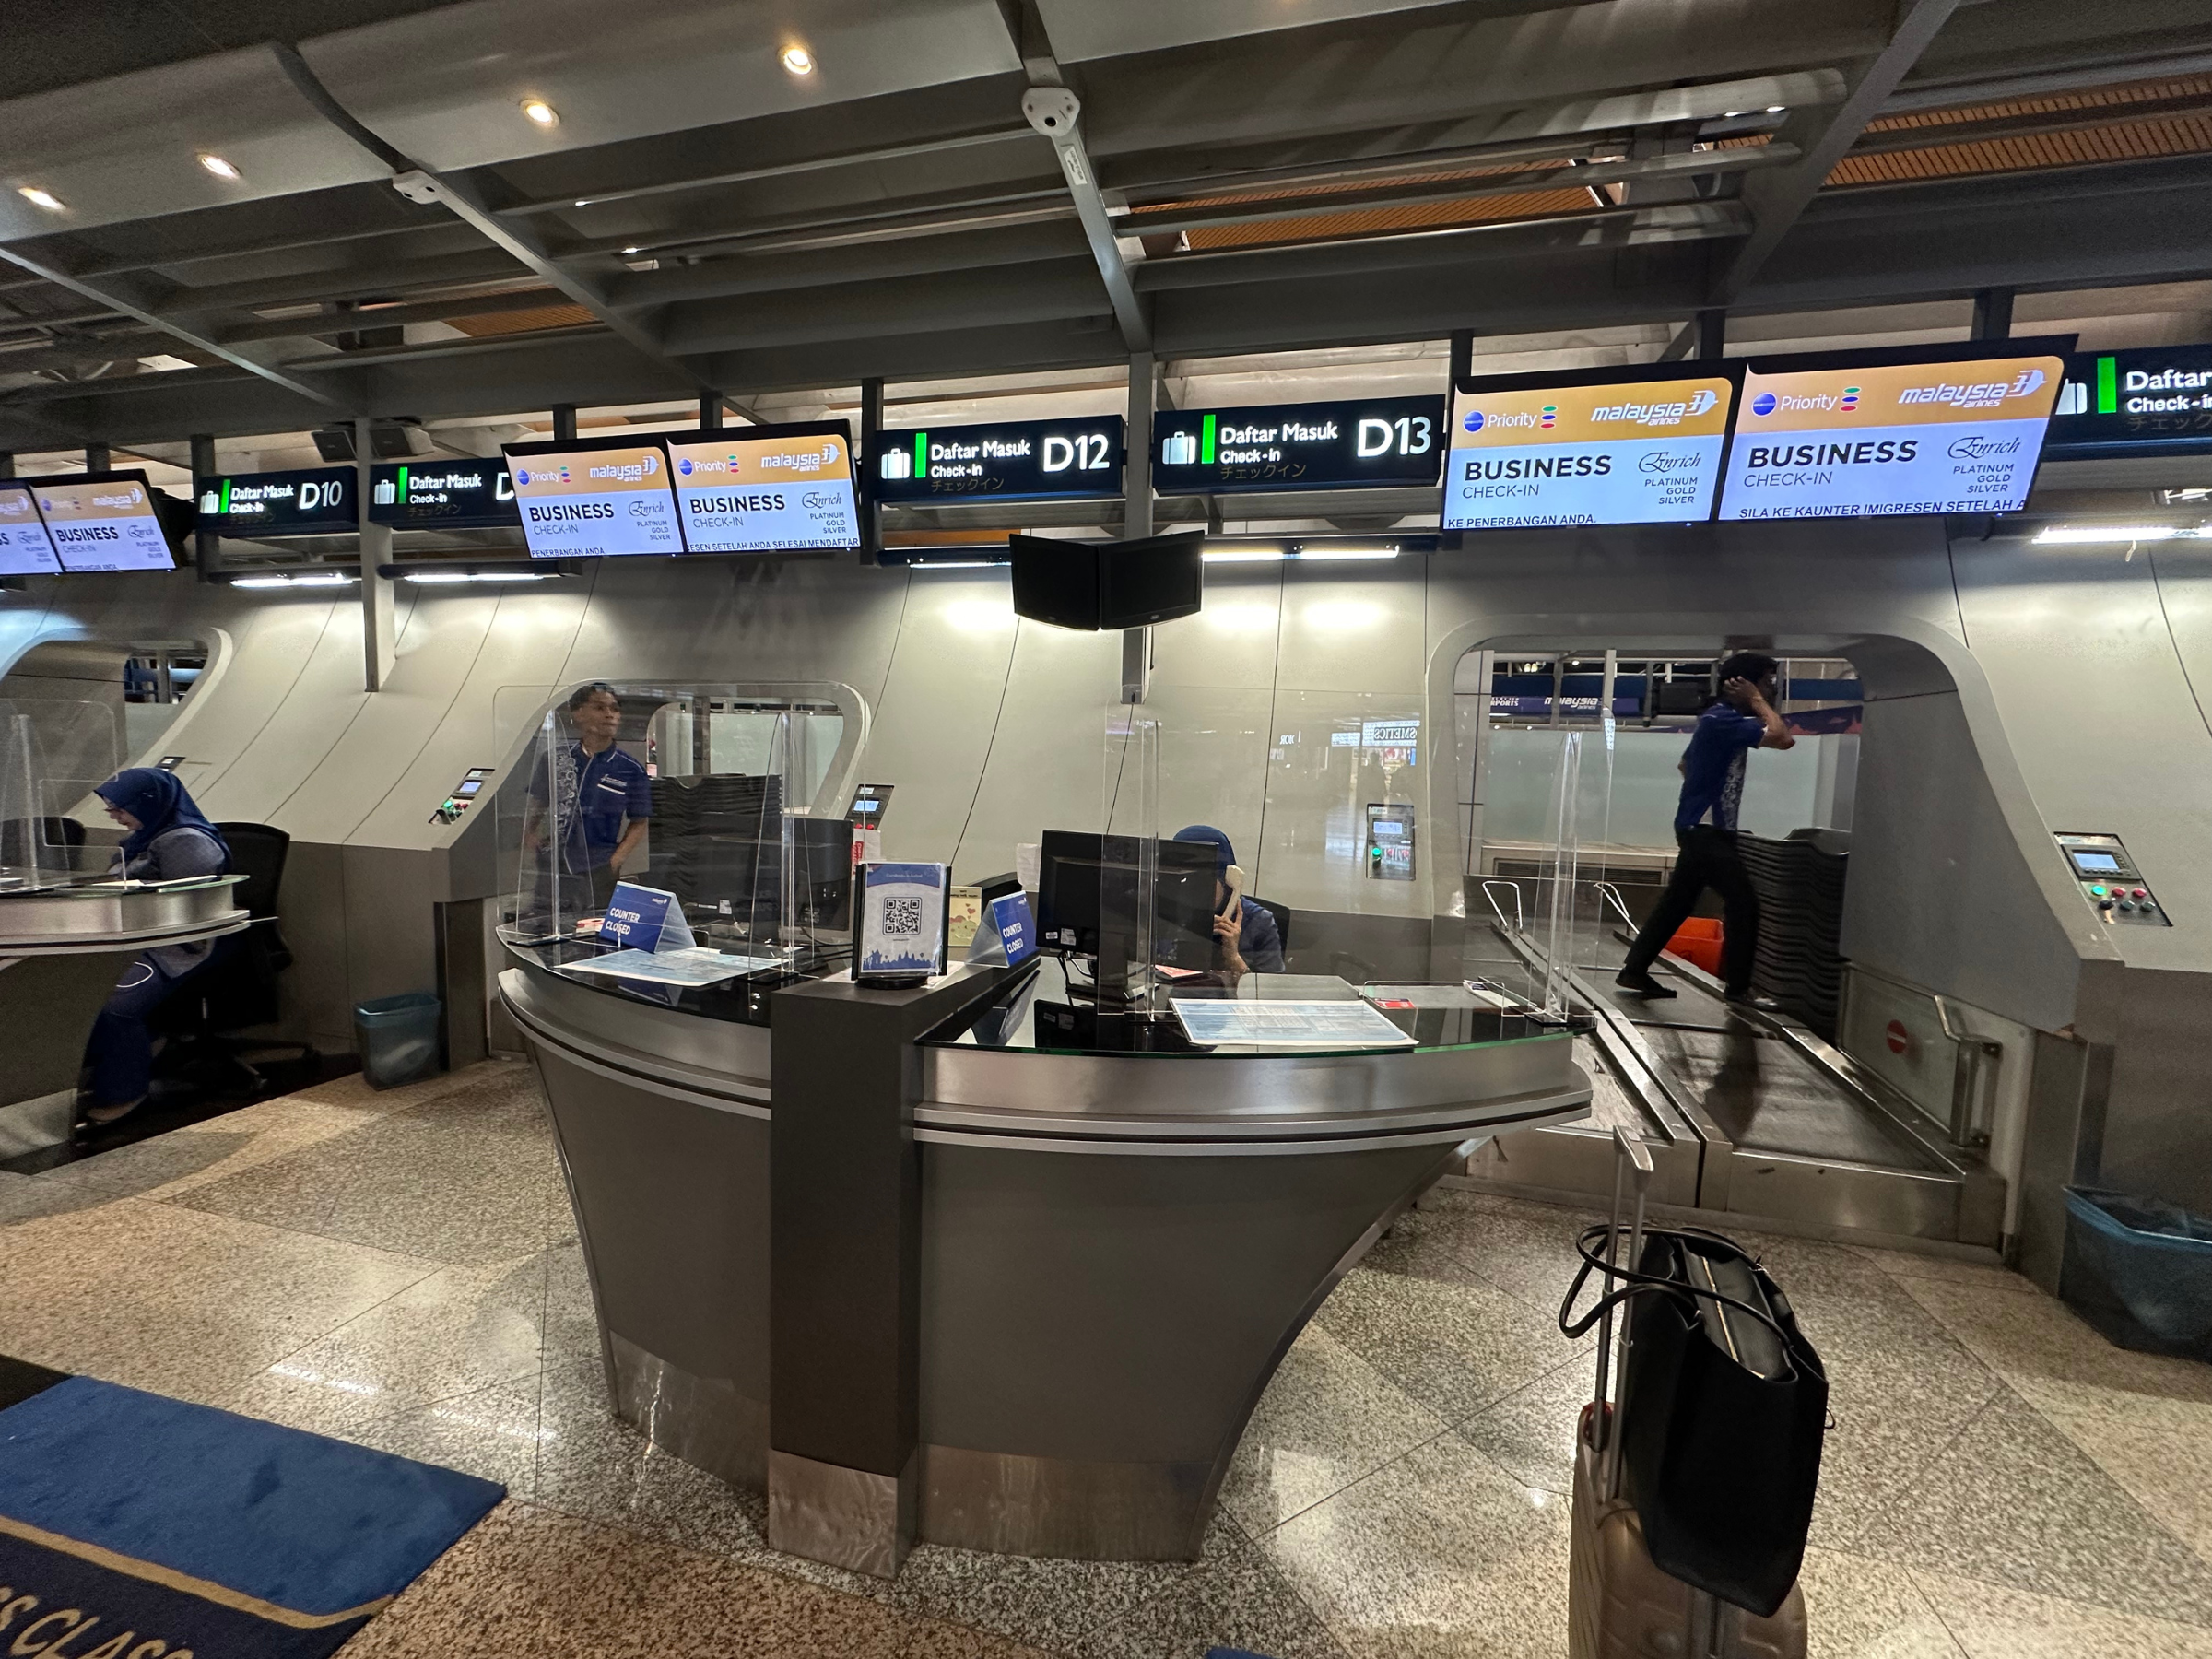 Malaysia Airlines Business check-in counters at Kuala Lumpur International Airport